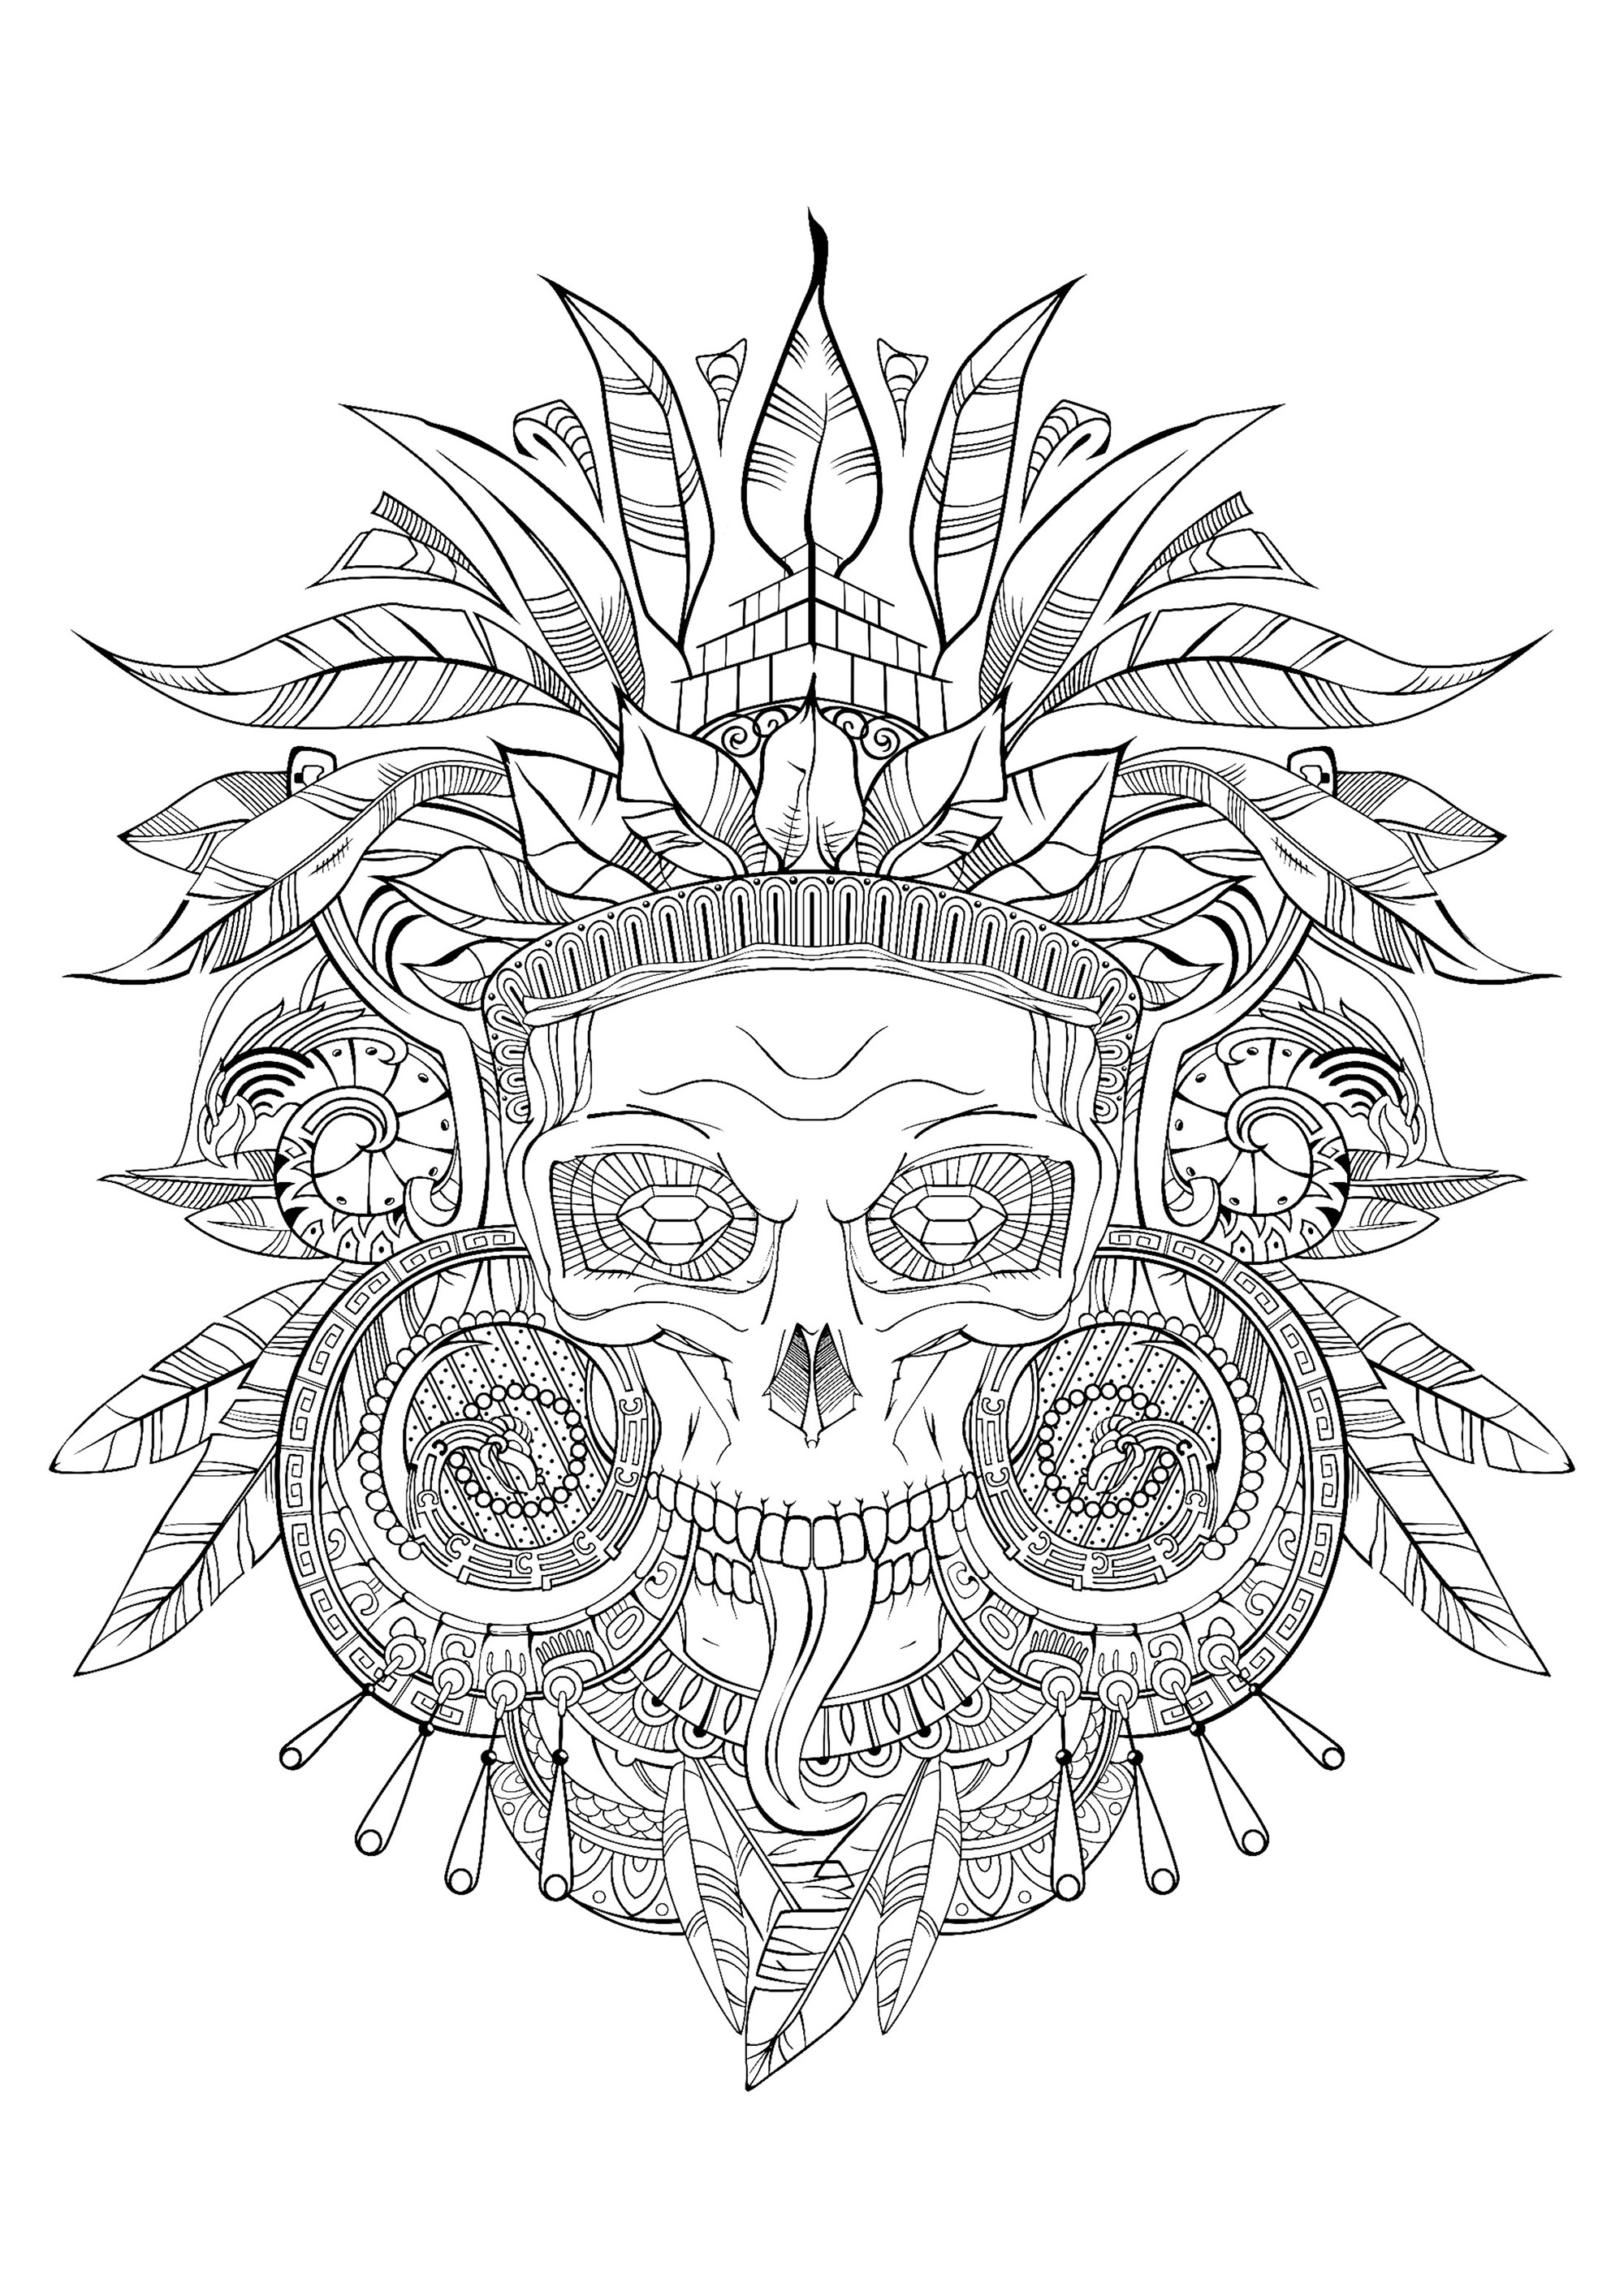 Download Aztec skull black white - Mayans & Incas Adult Coloring Pages